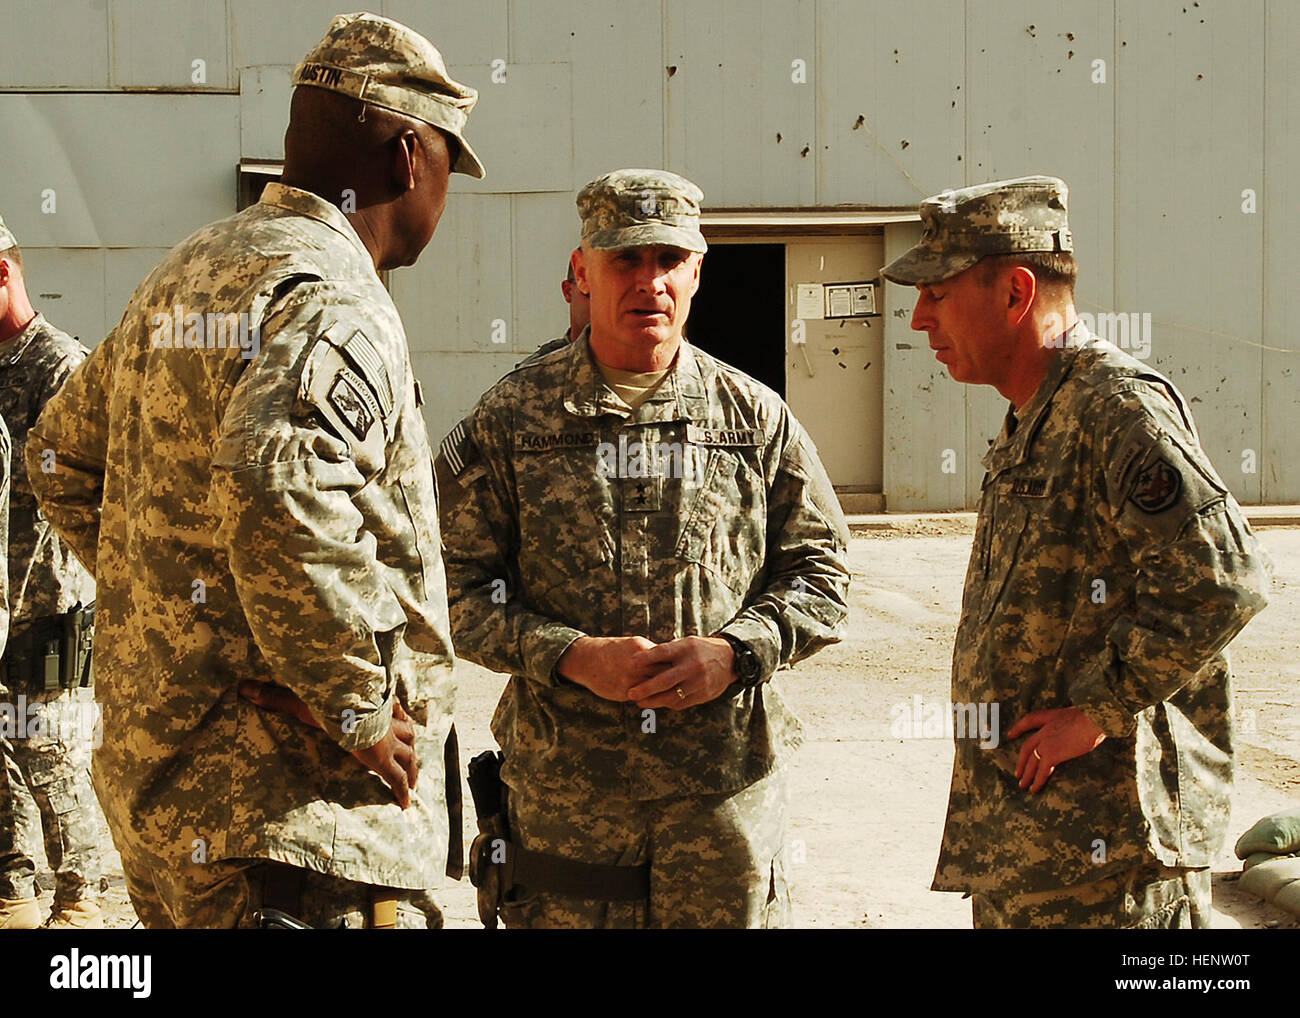 Minutes after a memorial service at Forward Operating Base Falcon, Maj. Gen. Jeff Hammond (center), the commanding general of Multi-National Division - Baghdad and the 4th Infantry Division, exchanges a few comforting words with Gen. David Petraeus (right), the commanding general of  Multi-National Forces - Iraq, and Lt. Gen. Lloyd Austin, the commanding general of Multi-National Corps - Iraq, before the commanders head out en route to the next stop, May 7. (U.S. Army photo/Spc. Angel D. Martinez) Top brass cross paths - MND-B, MNC-I, MNF-I commanders exchange comforting words after memorial s Stock Photo